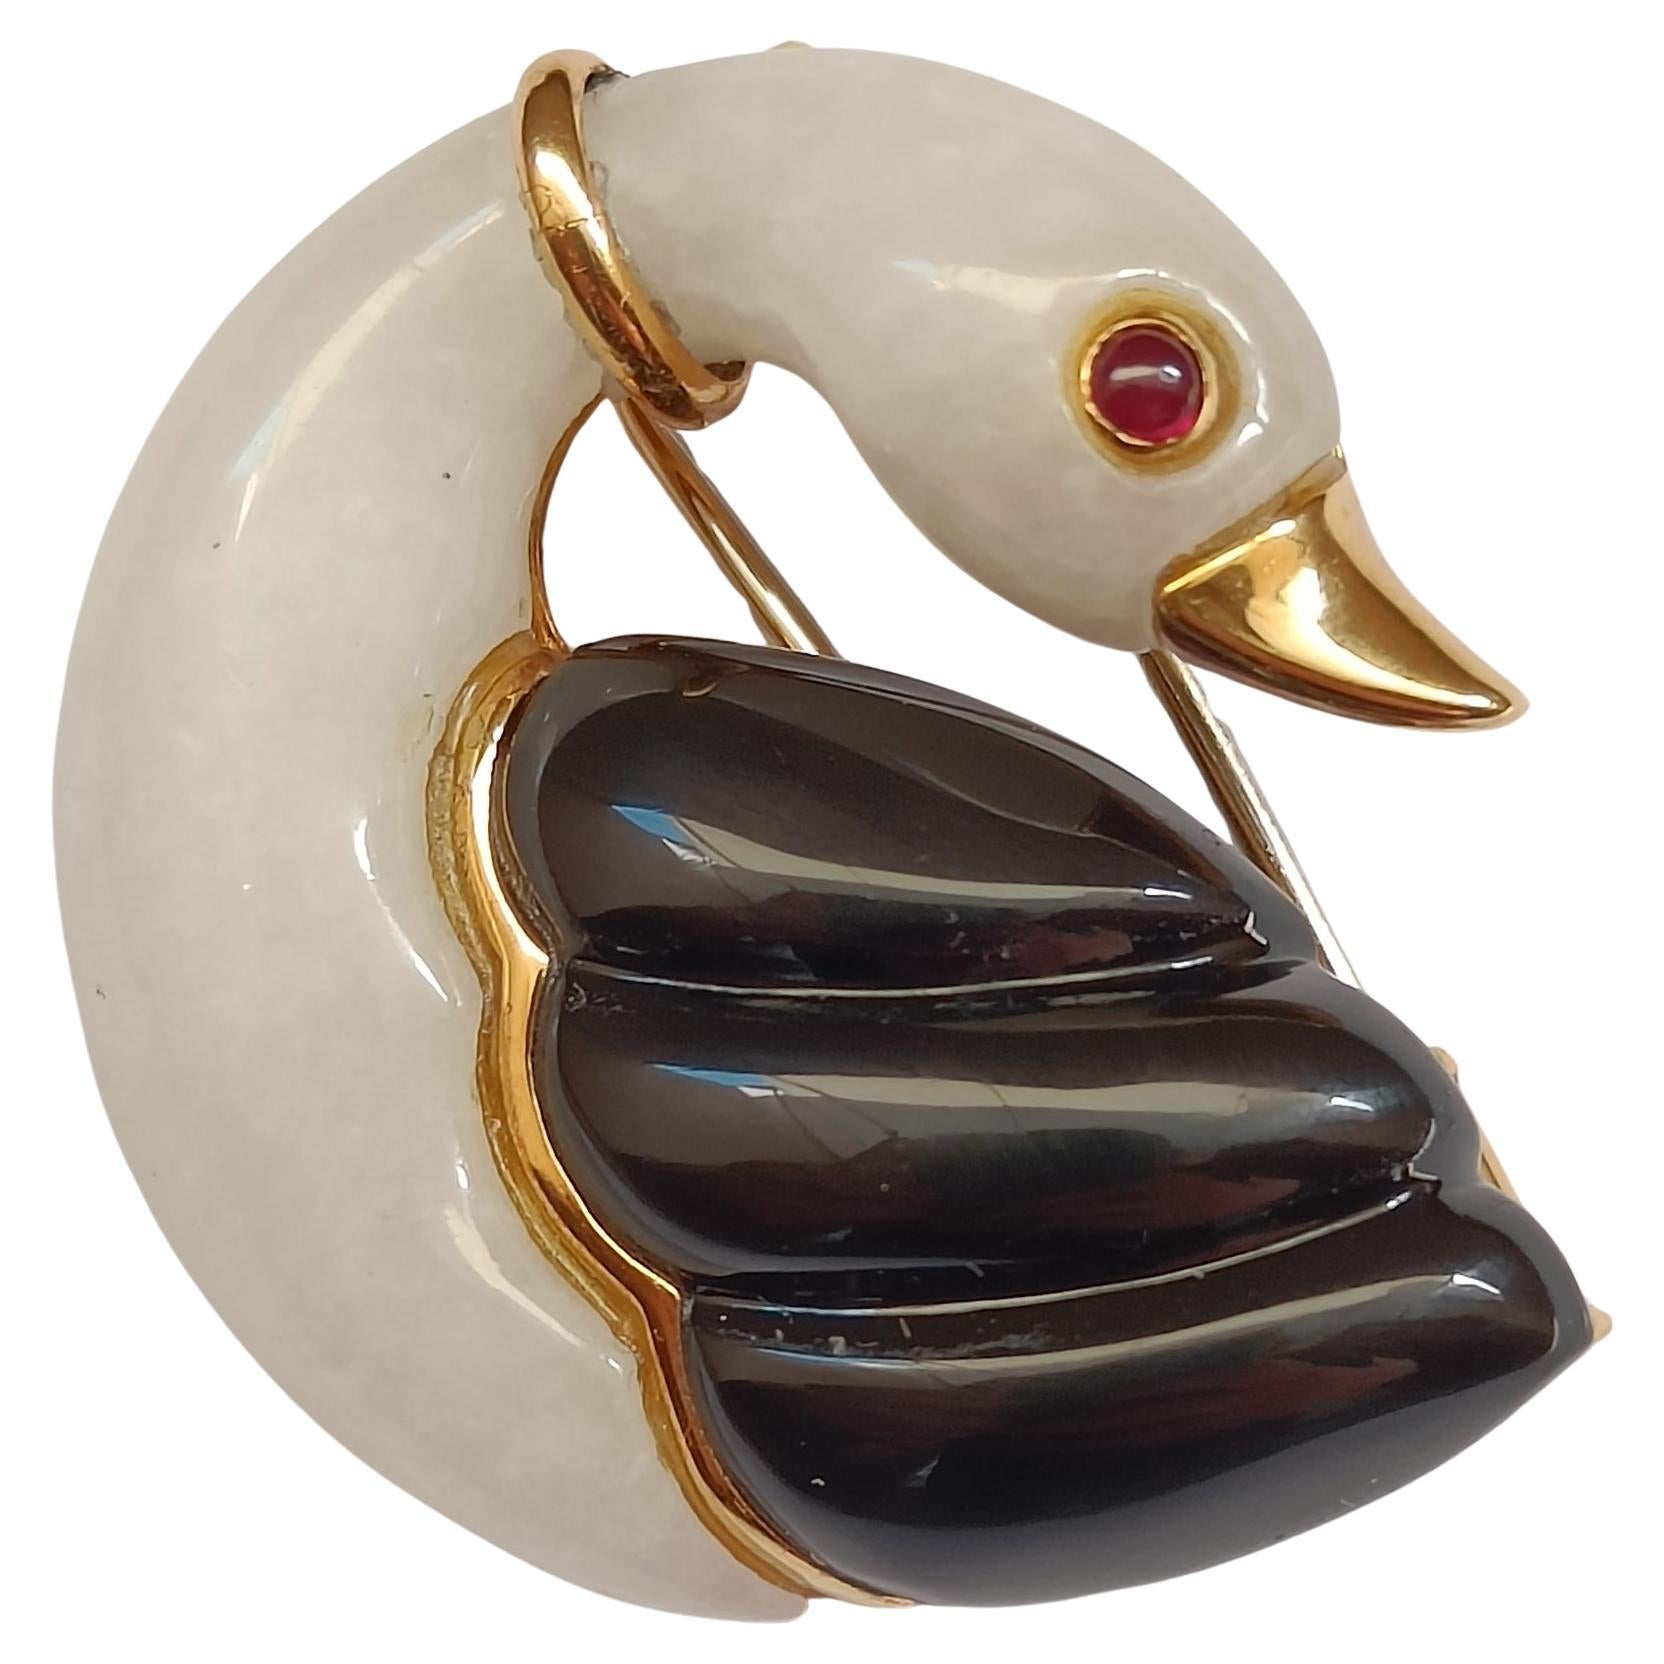 18k Gold Swan Brooch with Ruby, Chalcedony and Onyx - Vintage Animal Pin Brooch